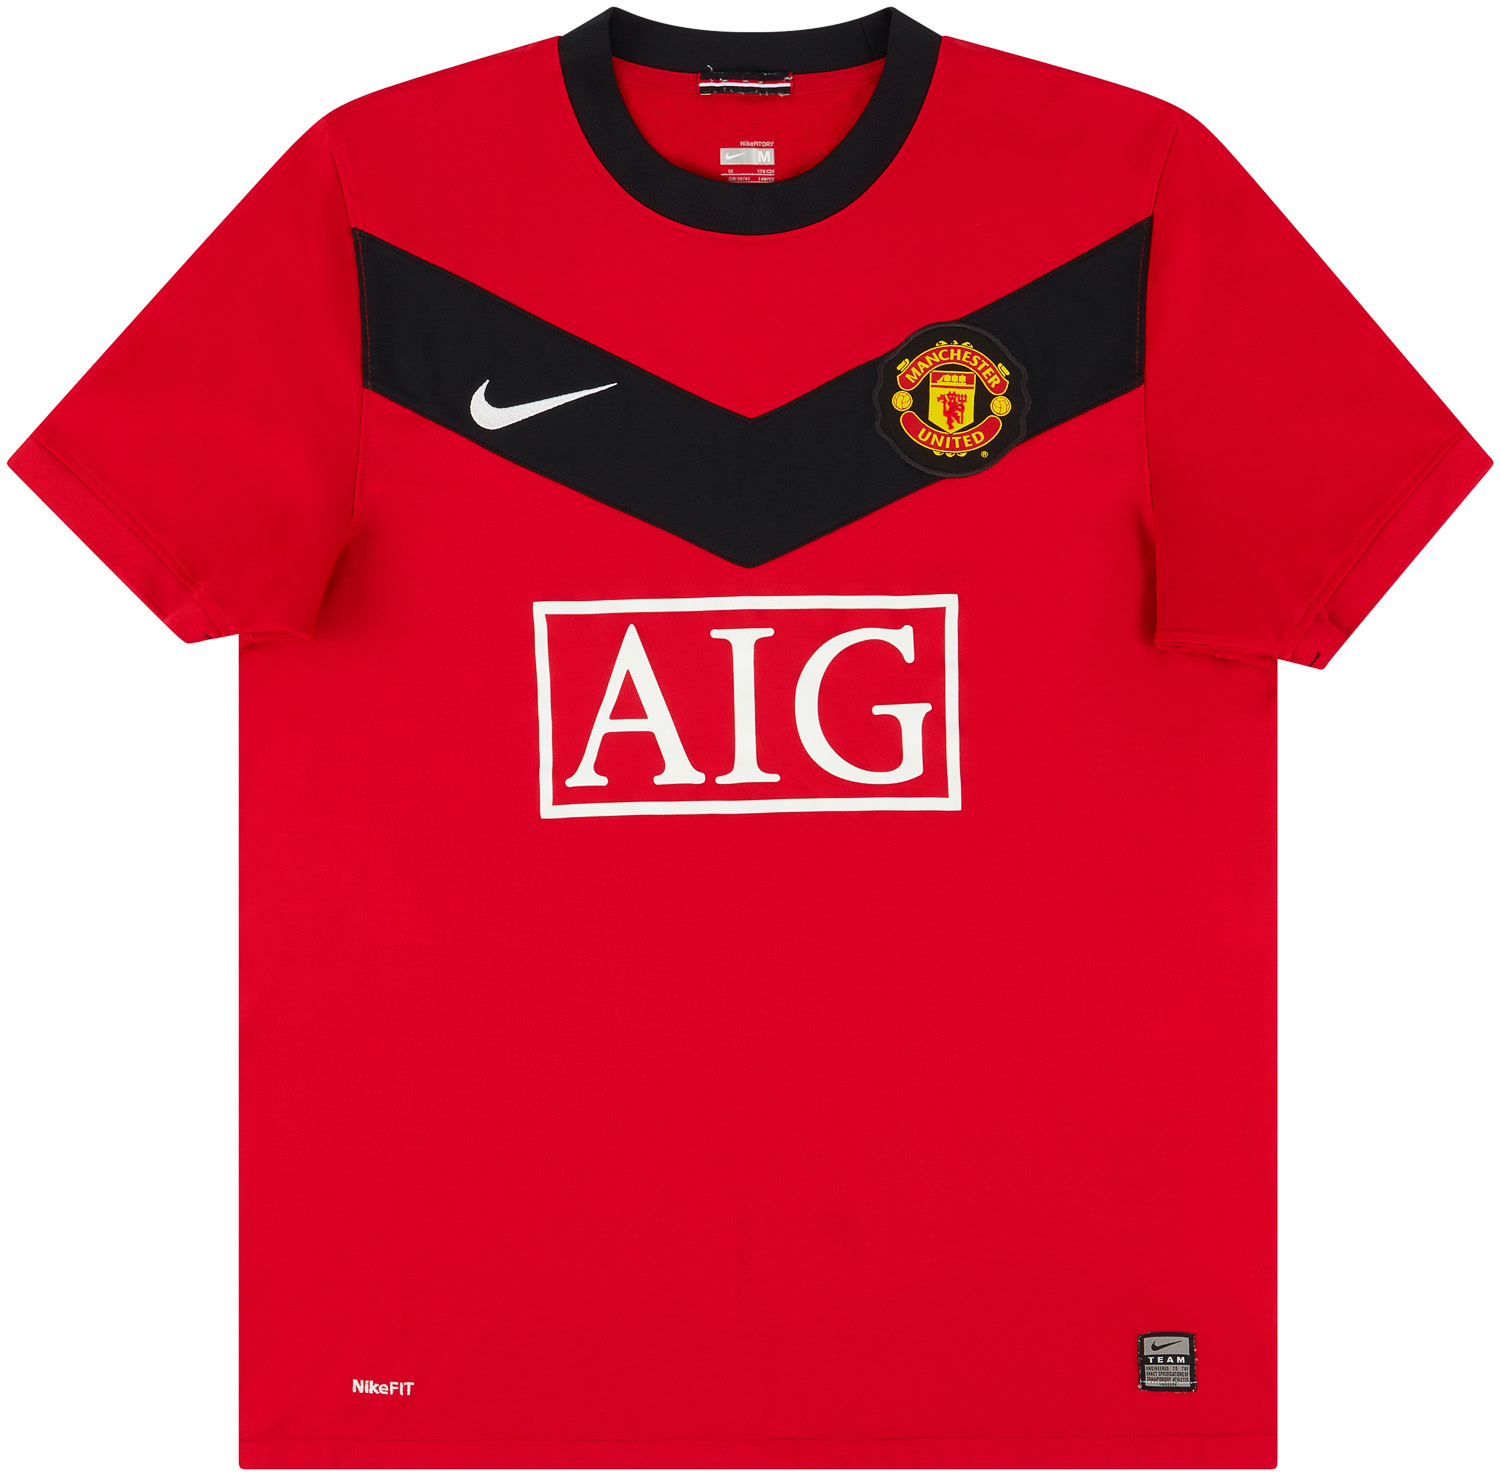 2009-10 Manchester United Home Shirt - 6/10 -